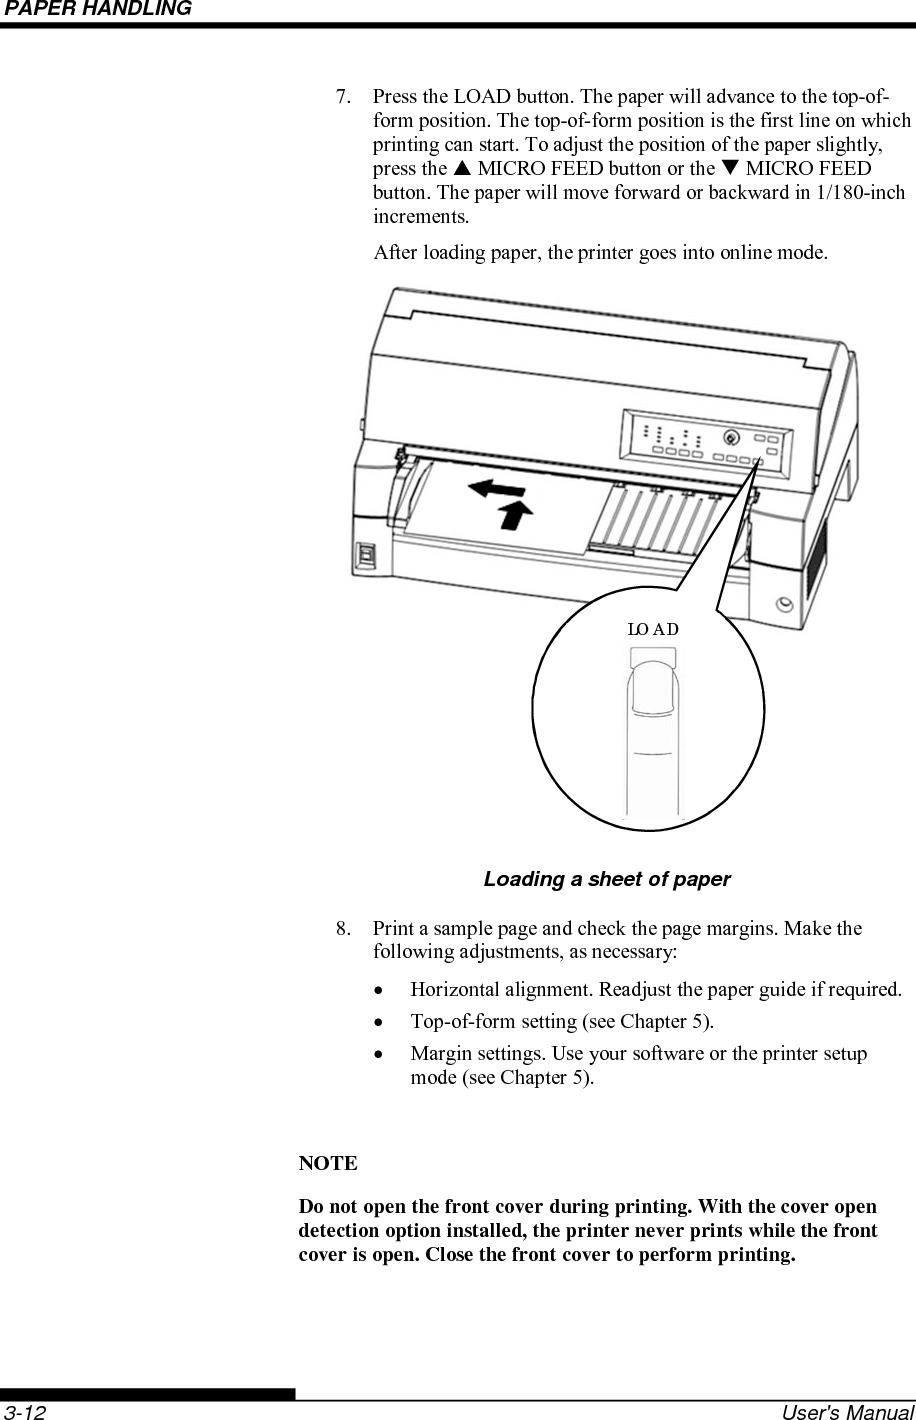 PAPER HANDLING    3-12  User&apos;s Manual 7.  Press the LOAD button. The paper will advance to the top-of-form position. The top-of-form position is the first line on which printing can start. To adjust the position of the paper slightly, press the  MICRO FEED button or the  MICRO FEED button. The paper will move forward or backward in 1/180-inch increments. After loading paper, the printer goes into online mode.       Loading a sheet of paper 8.  Print a sample page and check the page margins. Make the following adjustments, as necessary:   Horizontal alignment. Readjust the paper guide if required.   Top-of-form setting (see Chapter 5).   Margin settings. Use your software or the printer setup mode (see Chapter 5).  NOTE Do not open the front cover during printing. With the cover open detection option installed, the printer never prints while the front cover is open. Close the front cover to perform printing.  LOAD 